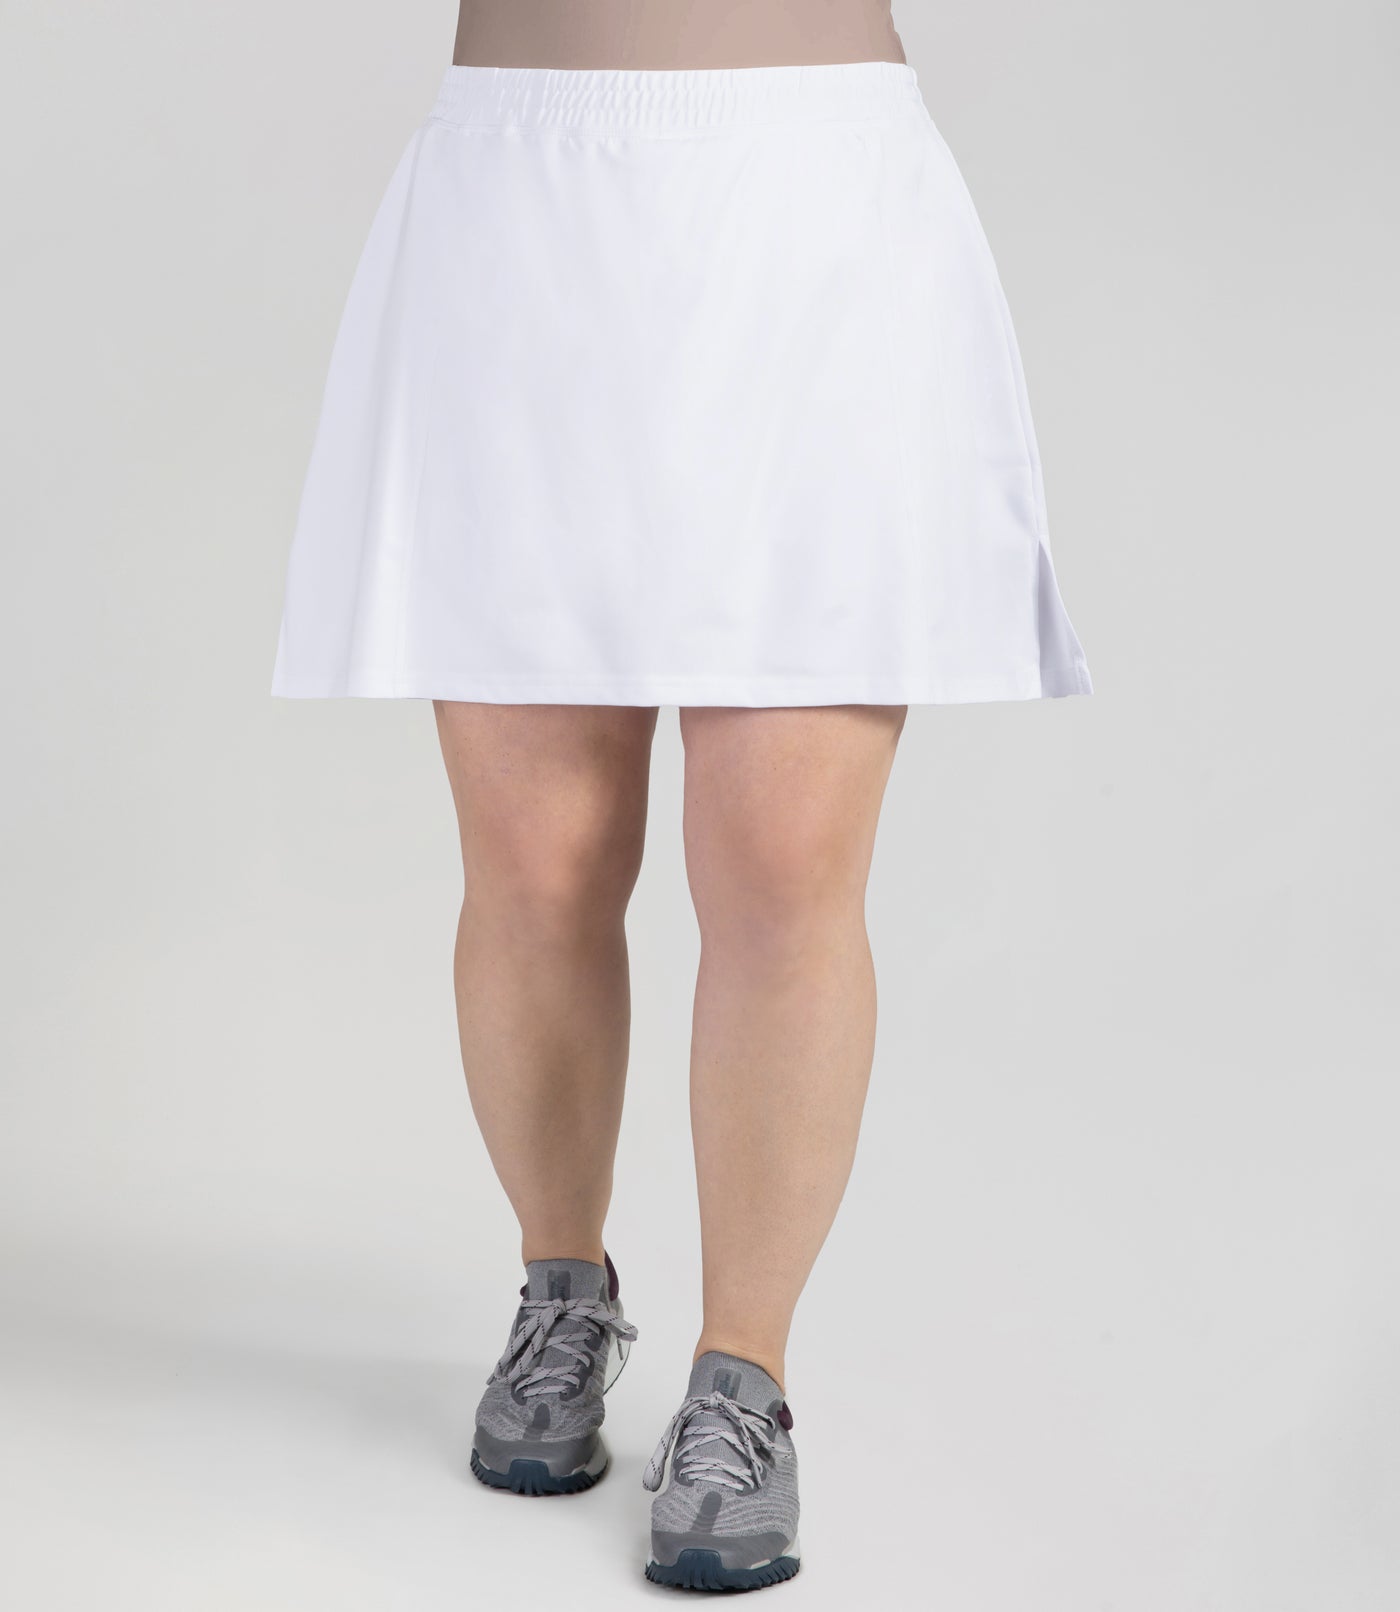 Bottom half of plus sized woman, front view, wearing JunoActives Quikwik lite skirted short in color white. Skirt hem is a few inches above knee.